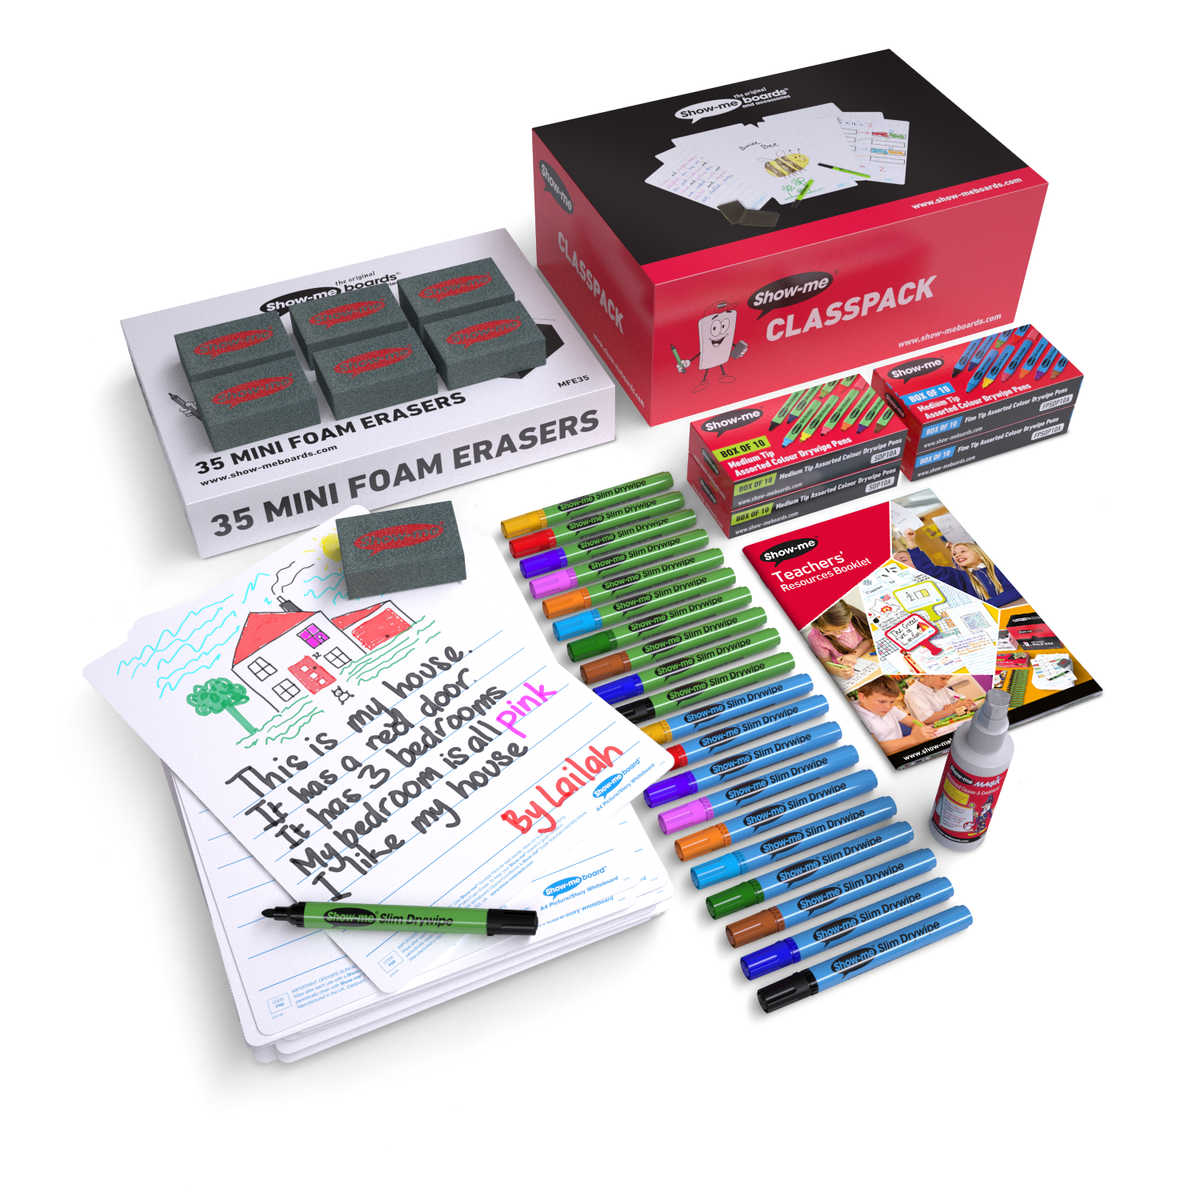 Picture And Story Boards Classpack